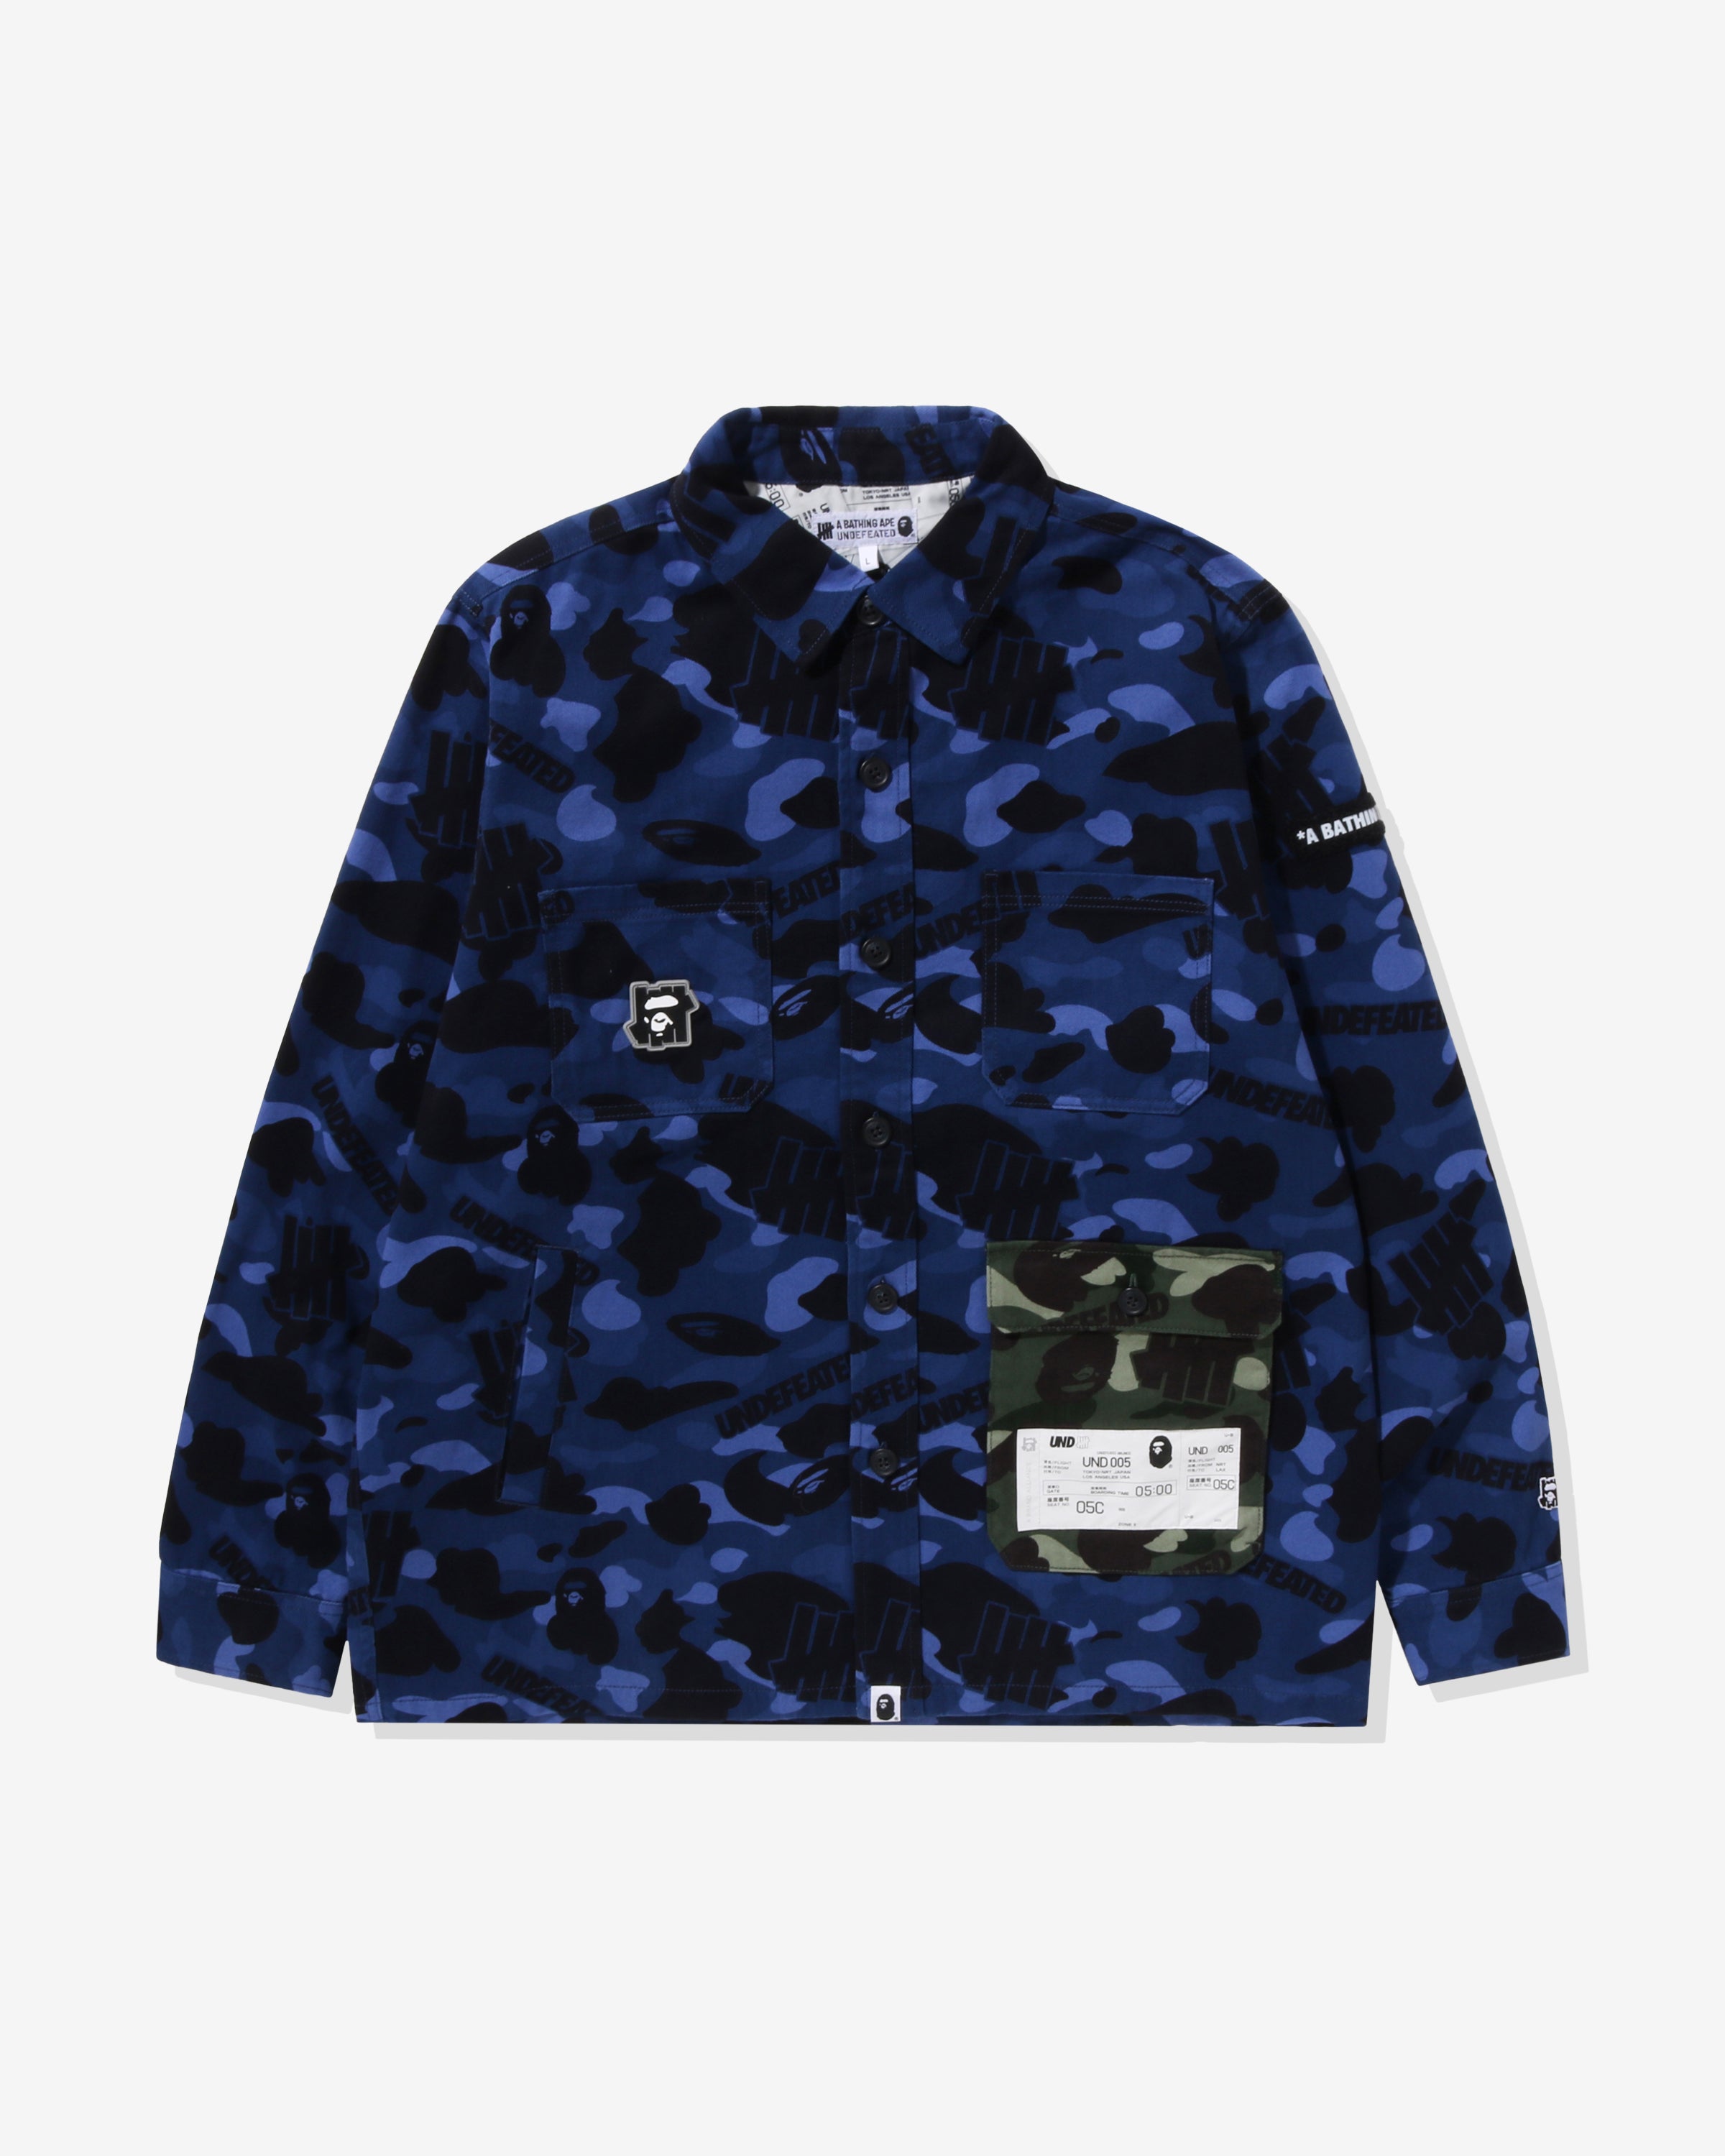 BAPE X UNDEFEATED COLOR CAMO FLANNEL JACKET - NAVY – Undefeated